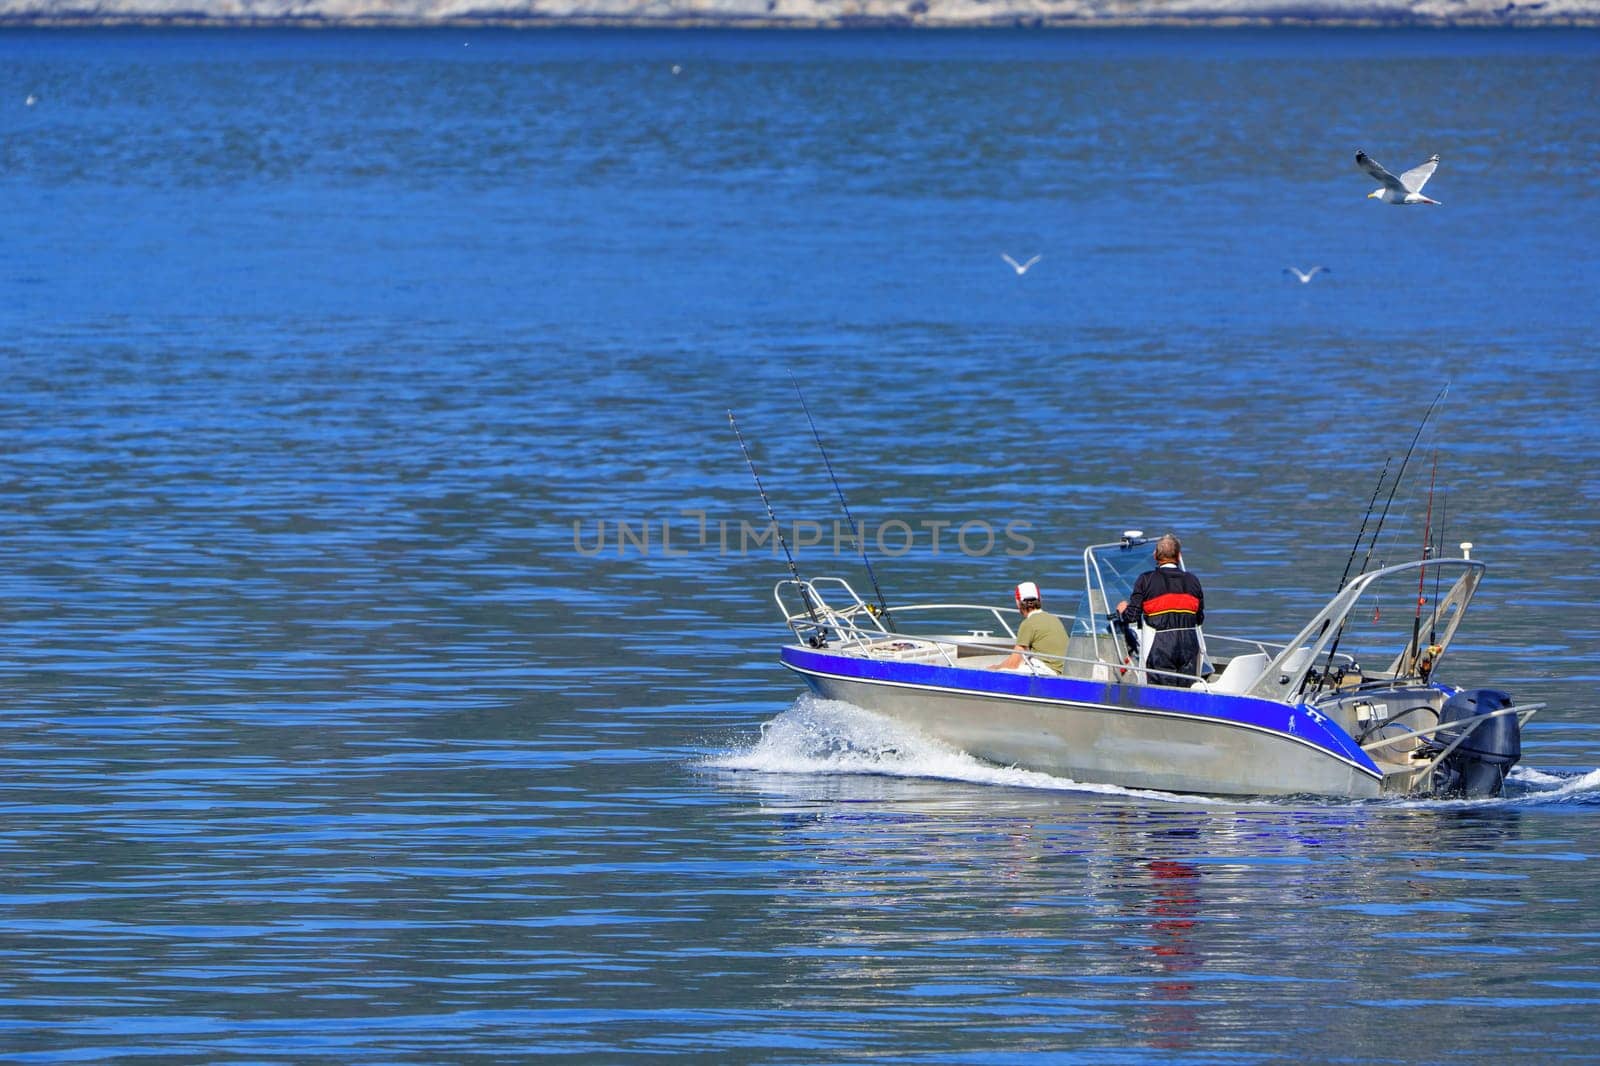 Tranquil Fishing Experience: Fishermen on an Aluminum Boat in the Norwegian Sea by PhotoTime